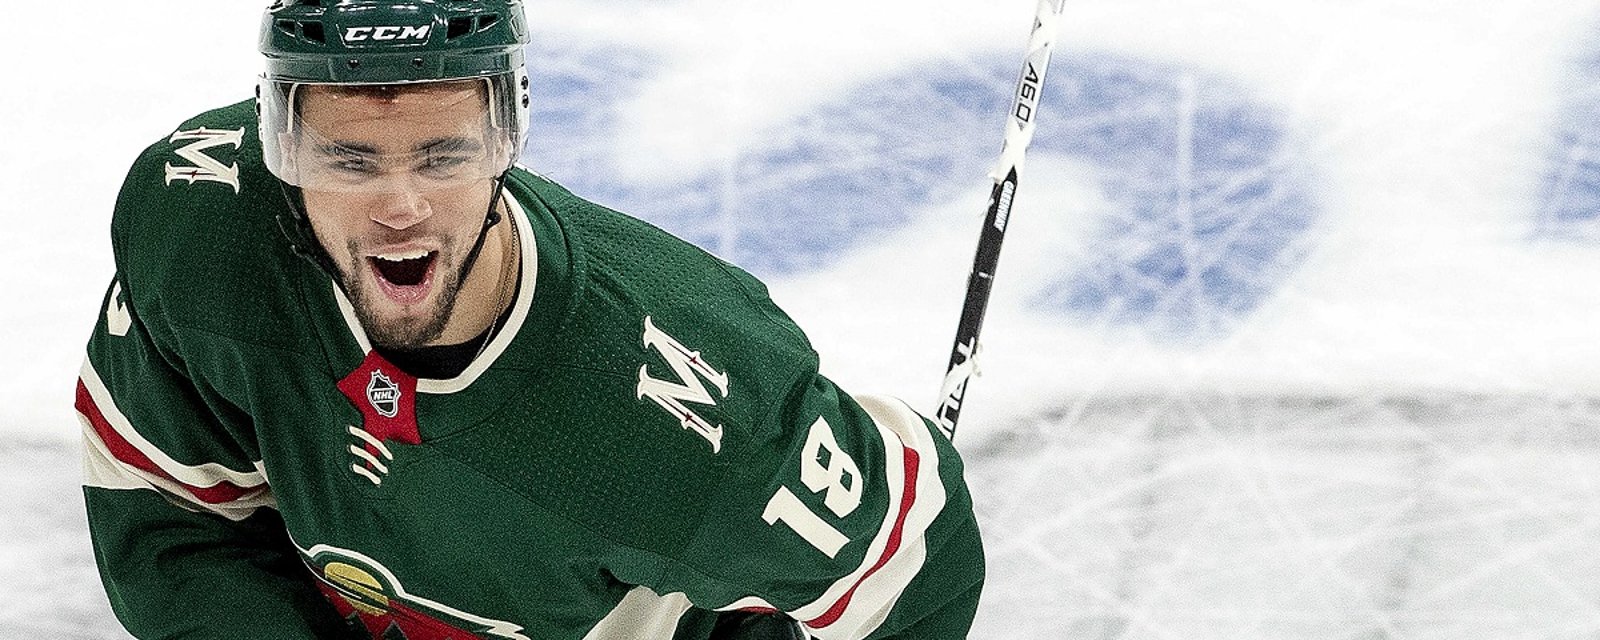 Wild top prospect expected to bounce back quickly from demotion.